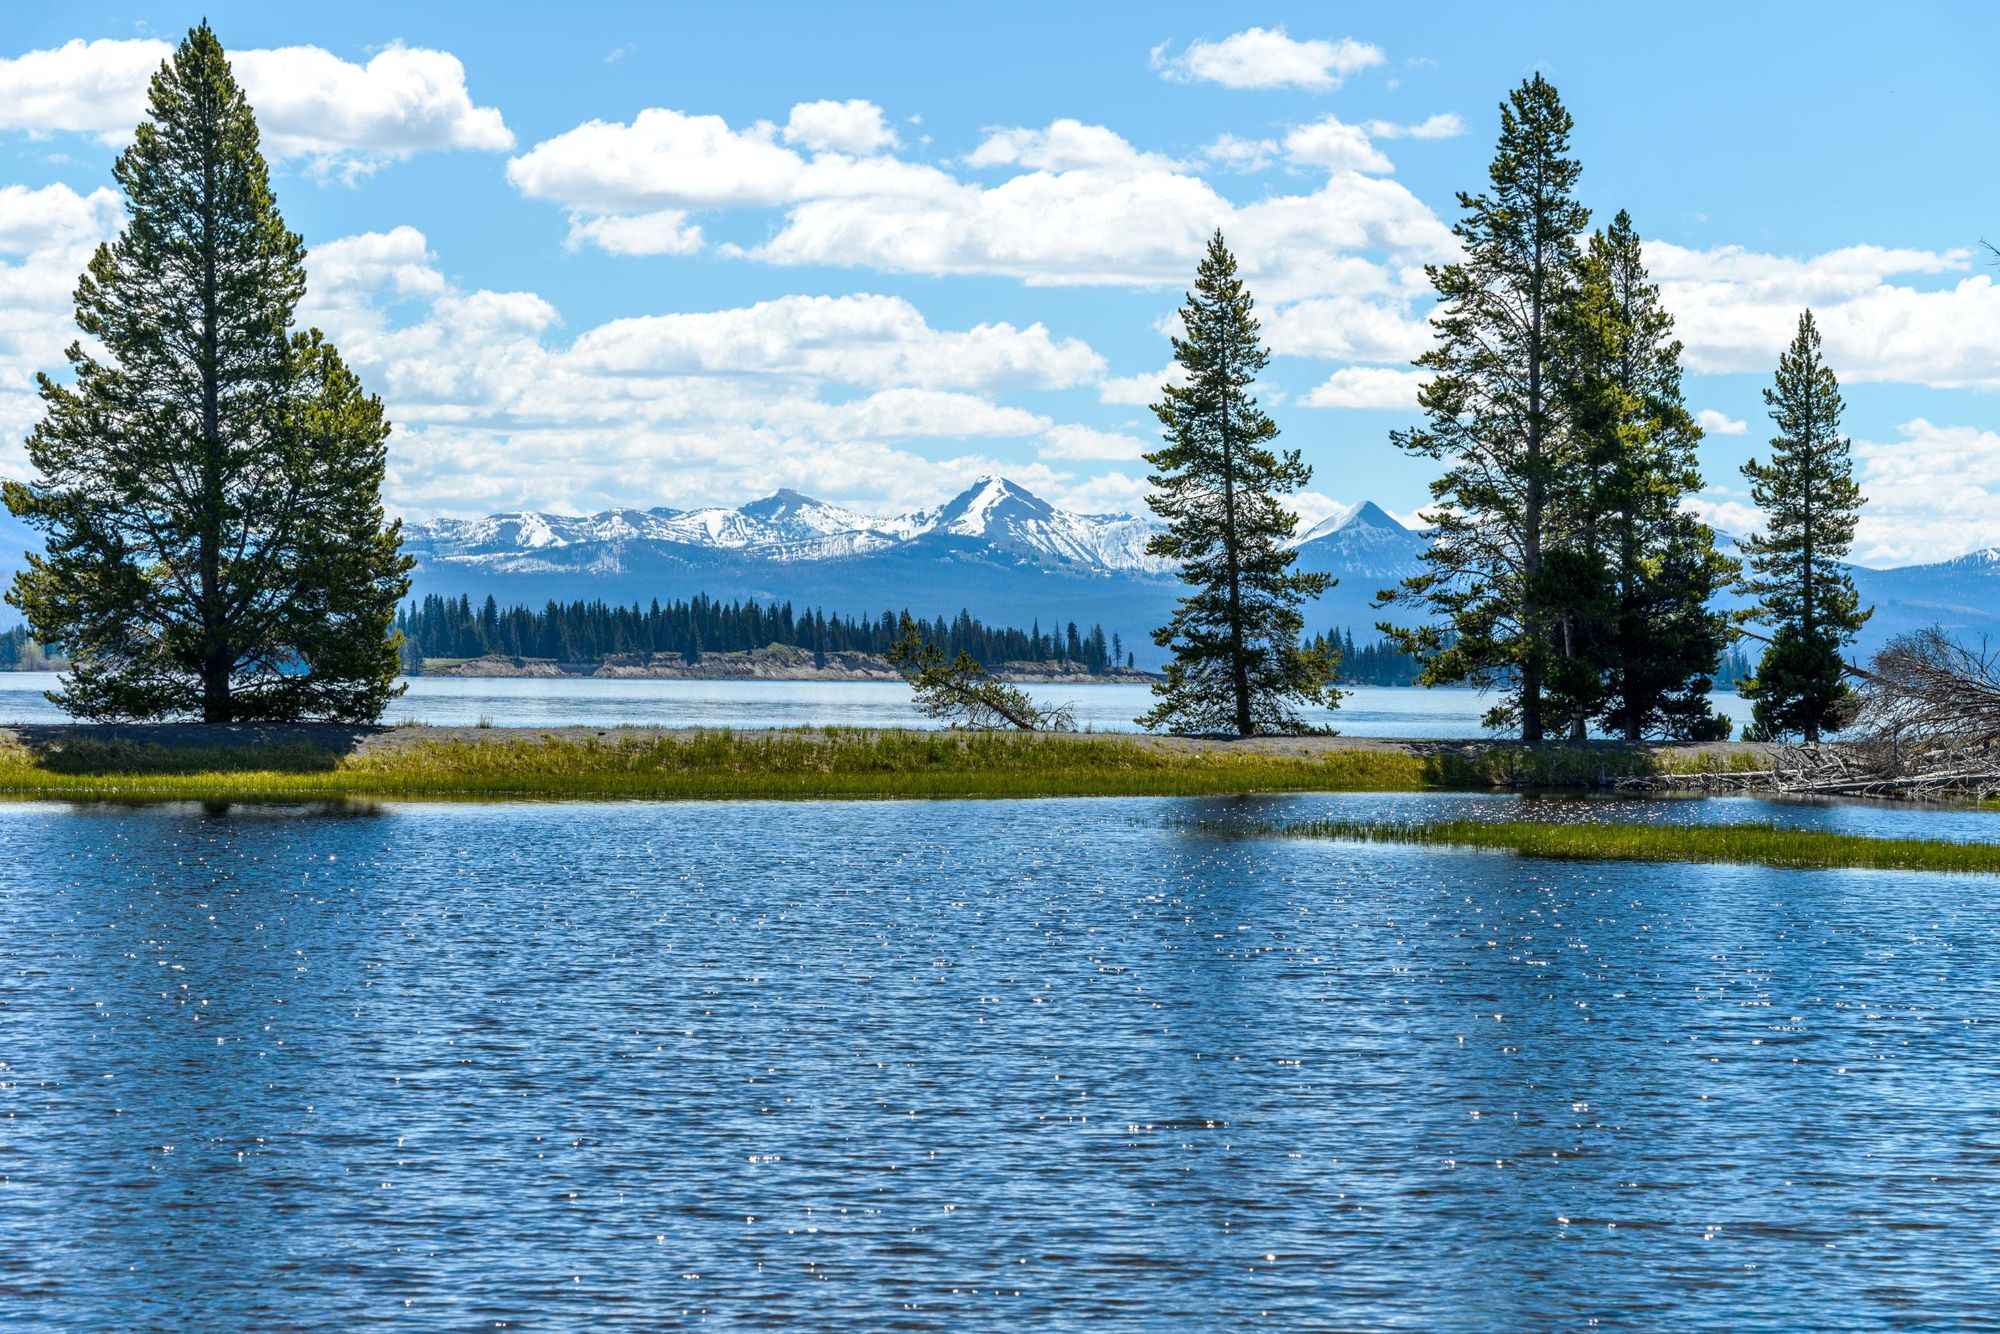 A spring view of Yellowstone Lake with snow-capped mountain range in the background, Yellowstone National Park, Wyoming, USA. Photo: Getty